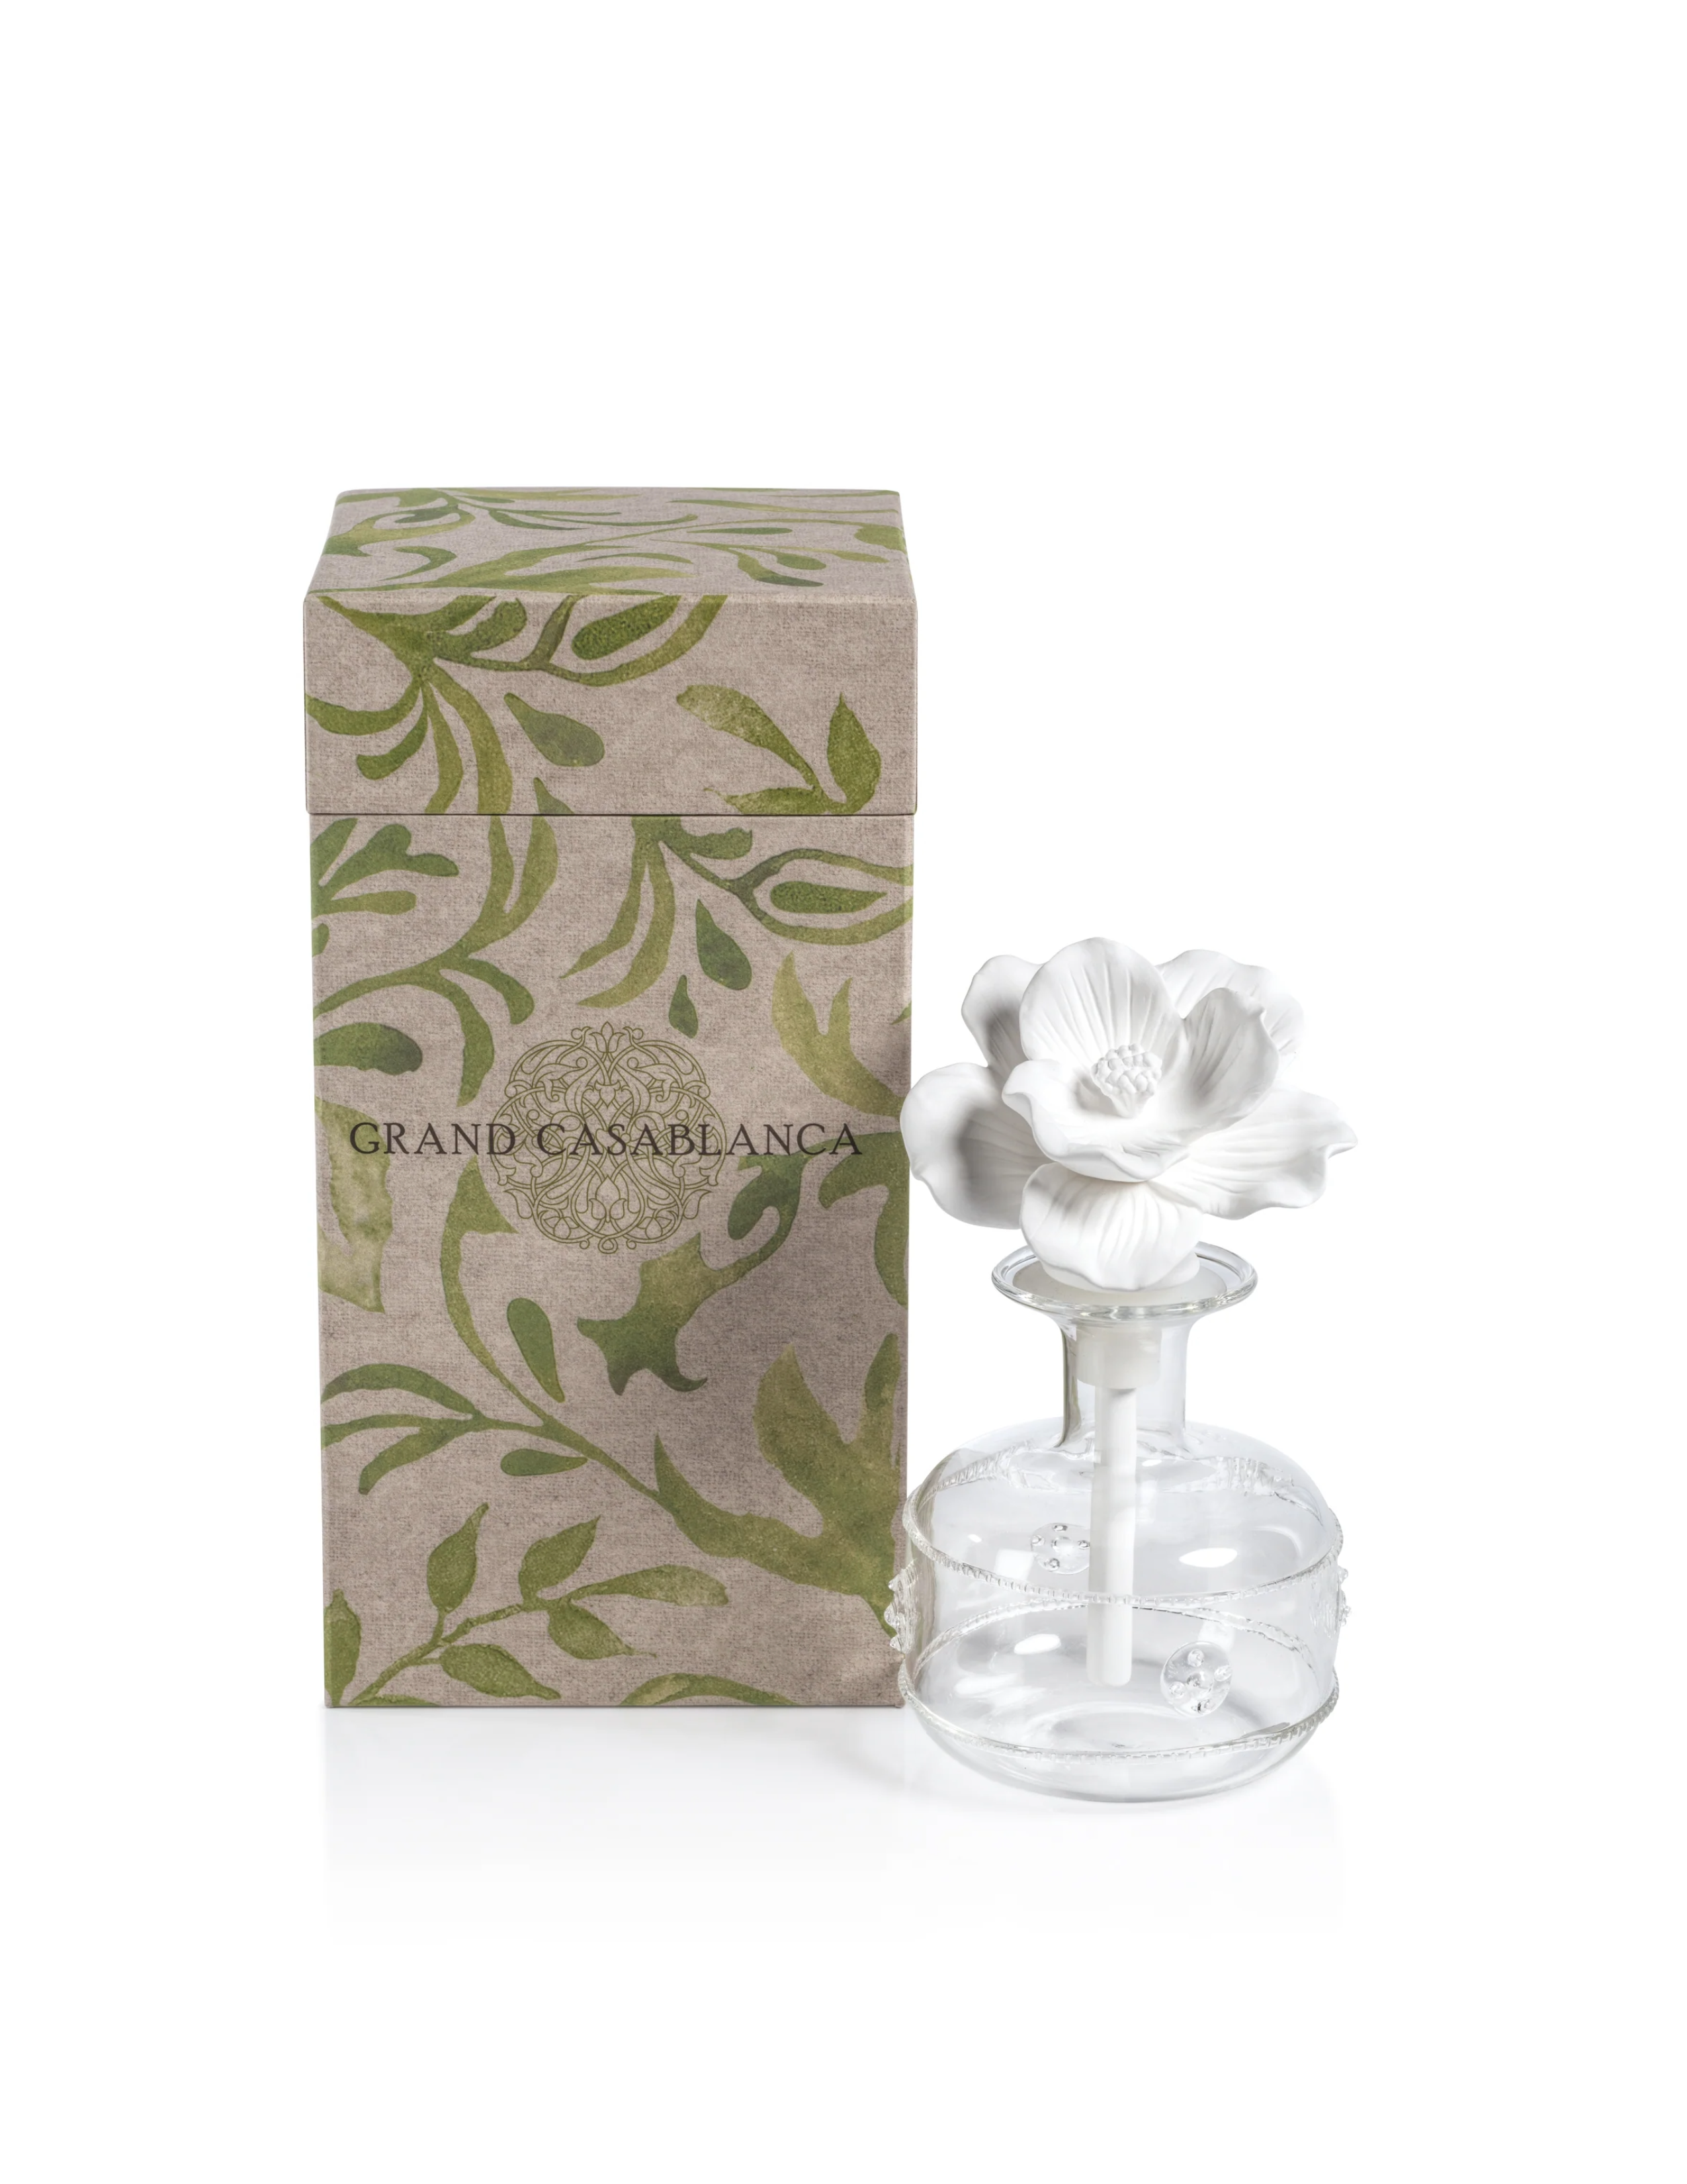 Grand Casablanca Porcelain Diffuser - Lily of the Valley